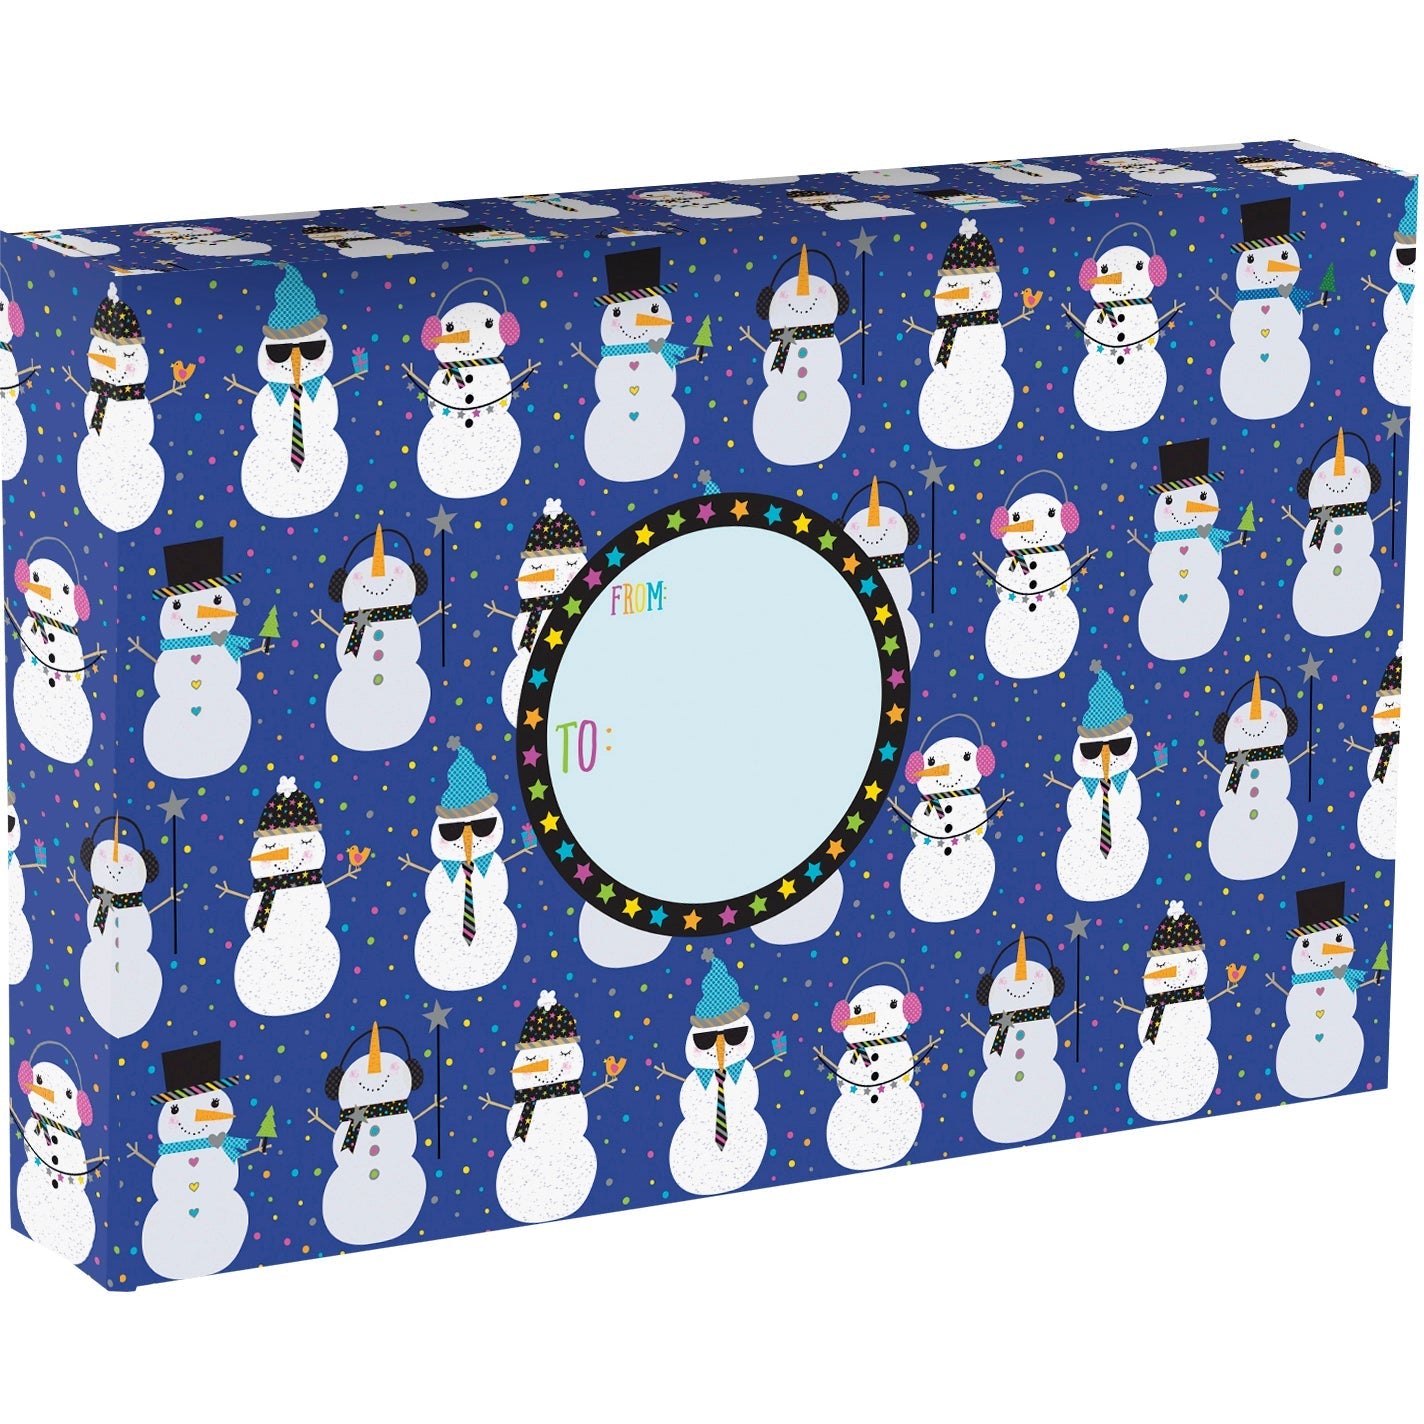 Snowman Party Large Christmas Printed Gift Mailing Boxes